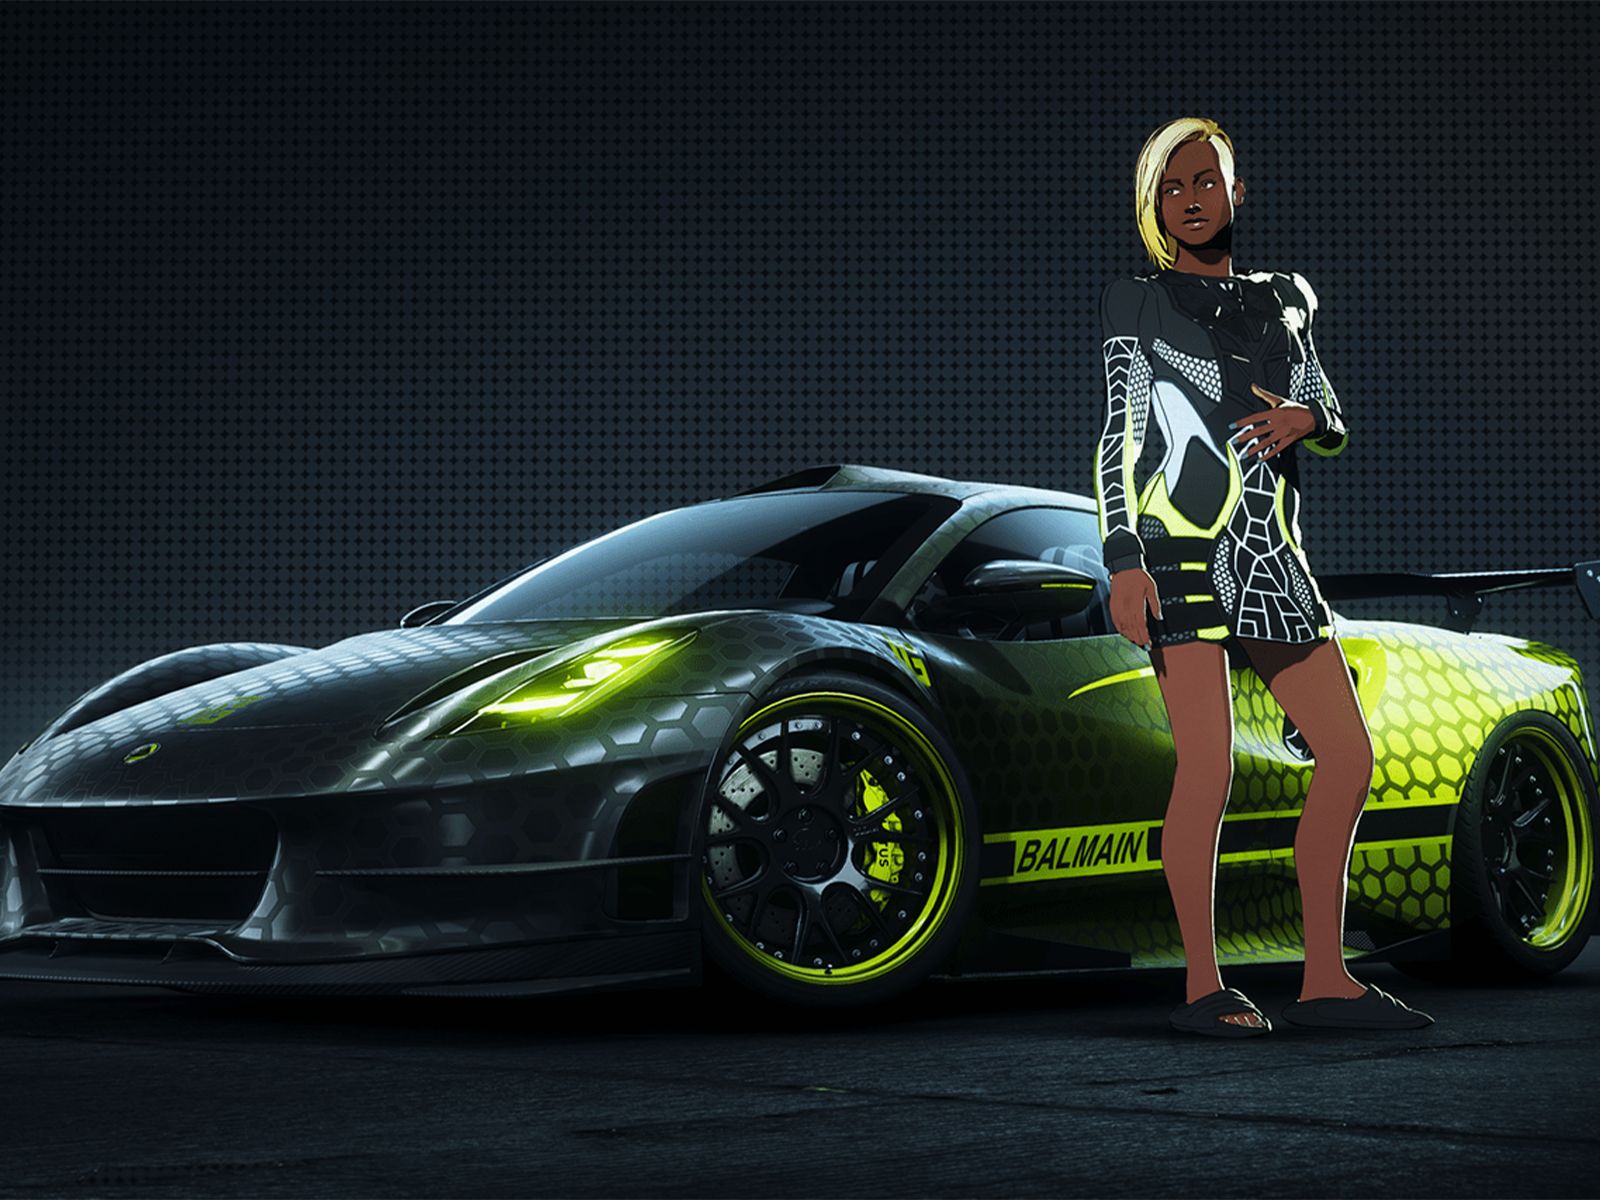 Balmain is also part of ‘Need for Speed Unbound’